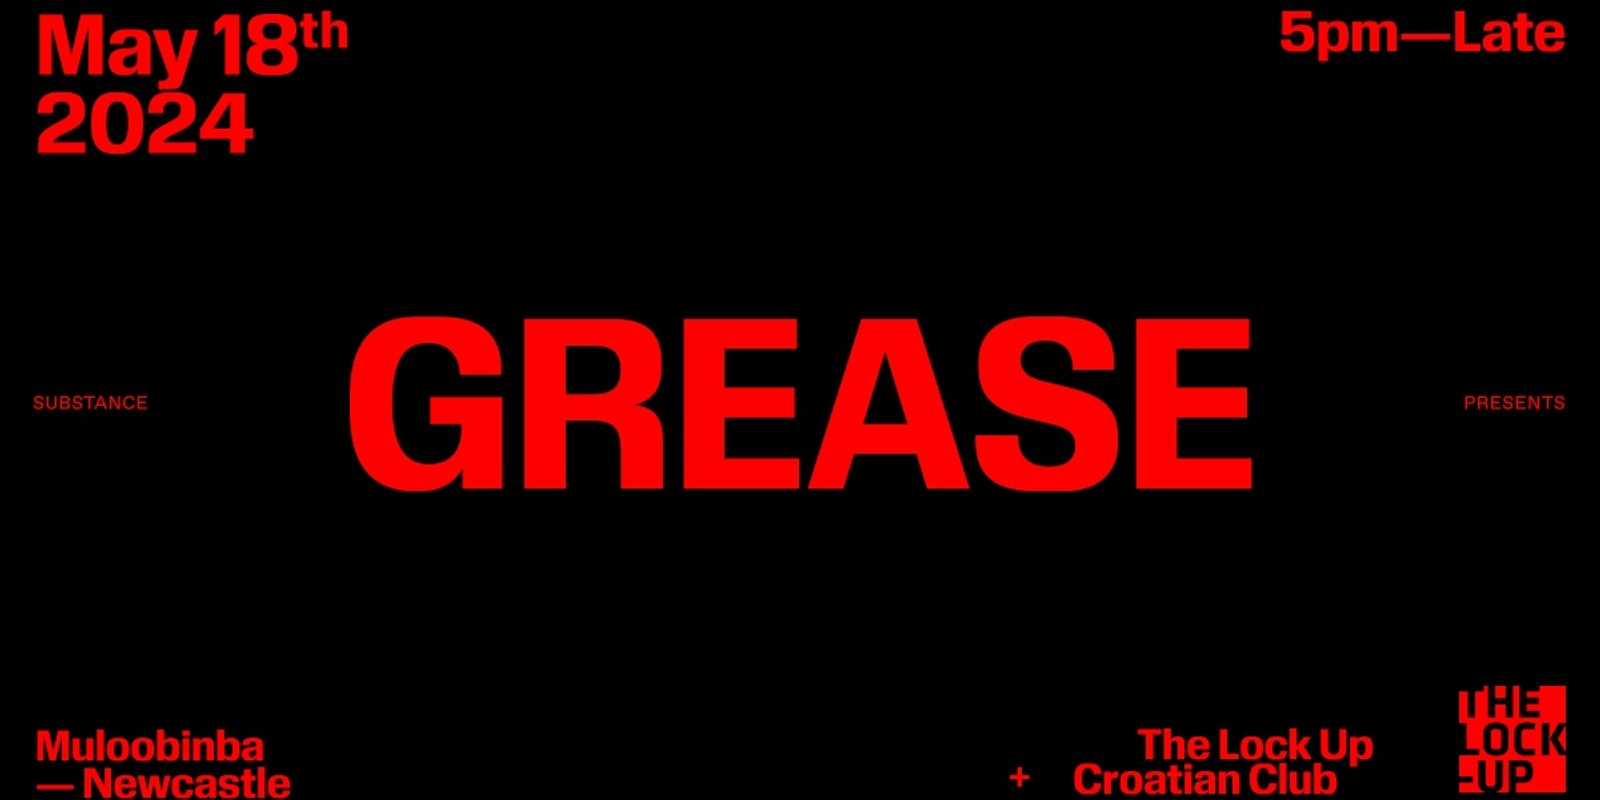 Banner image for substance presents: GREASE